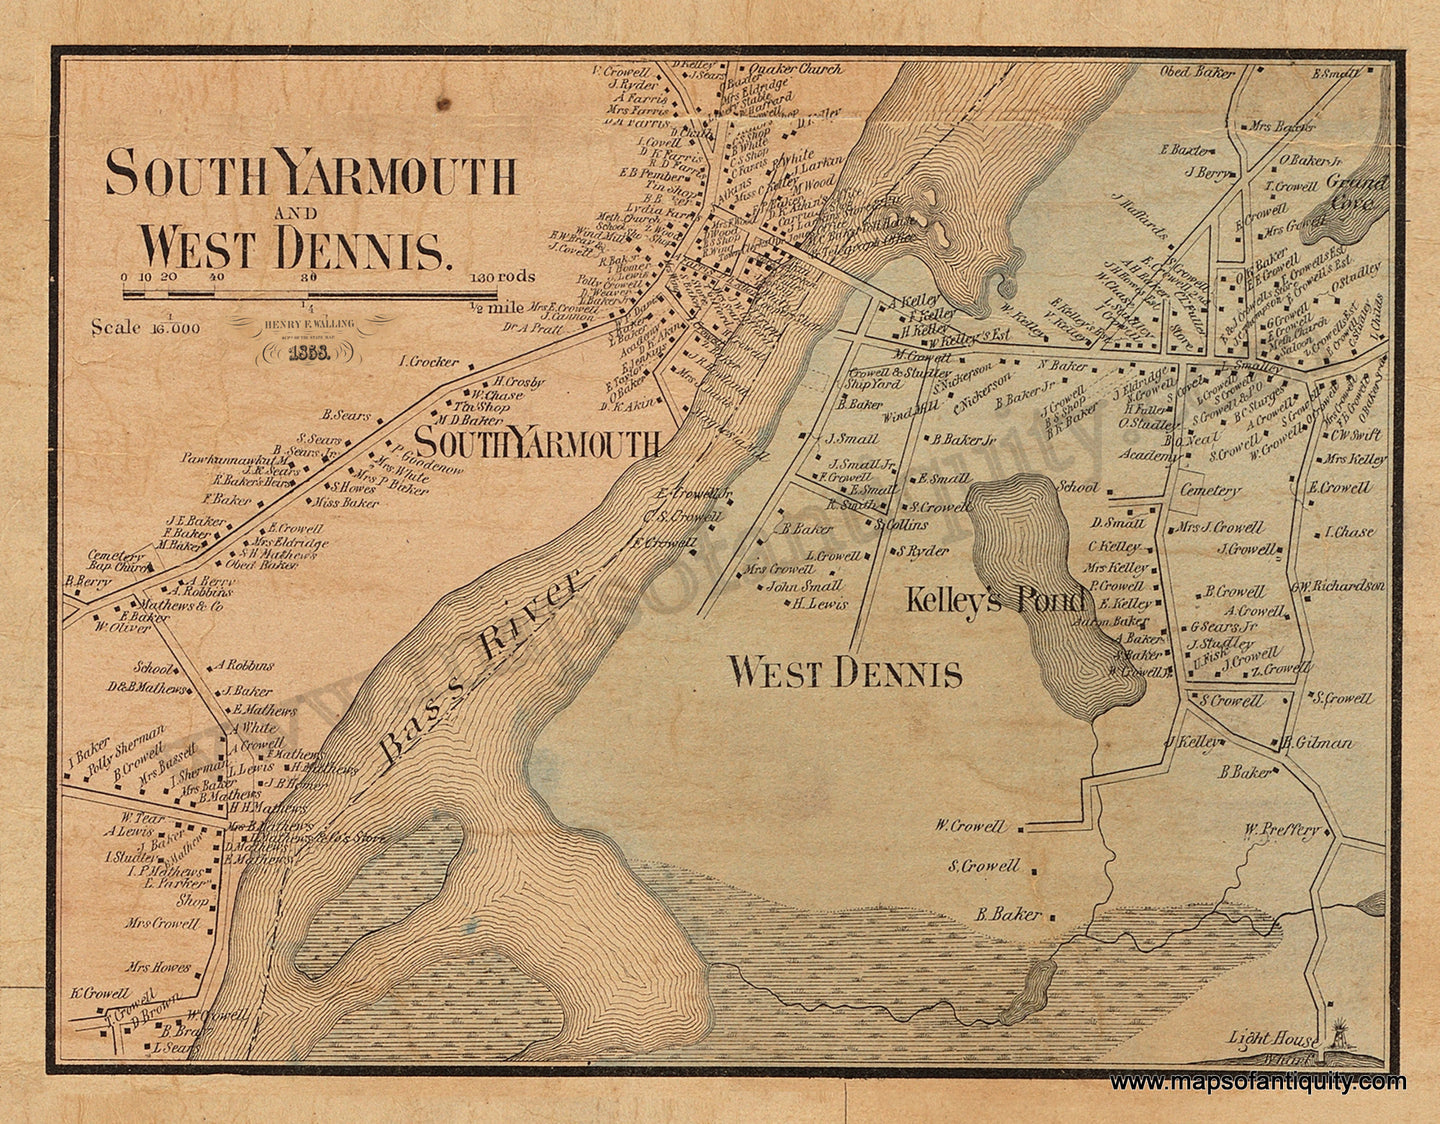 Reproduction-Map-South-Yarmouth-and-West-Dennis-1858-Cape-Cod-Barnstable-County-Bass-River